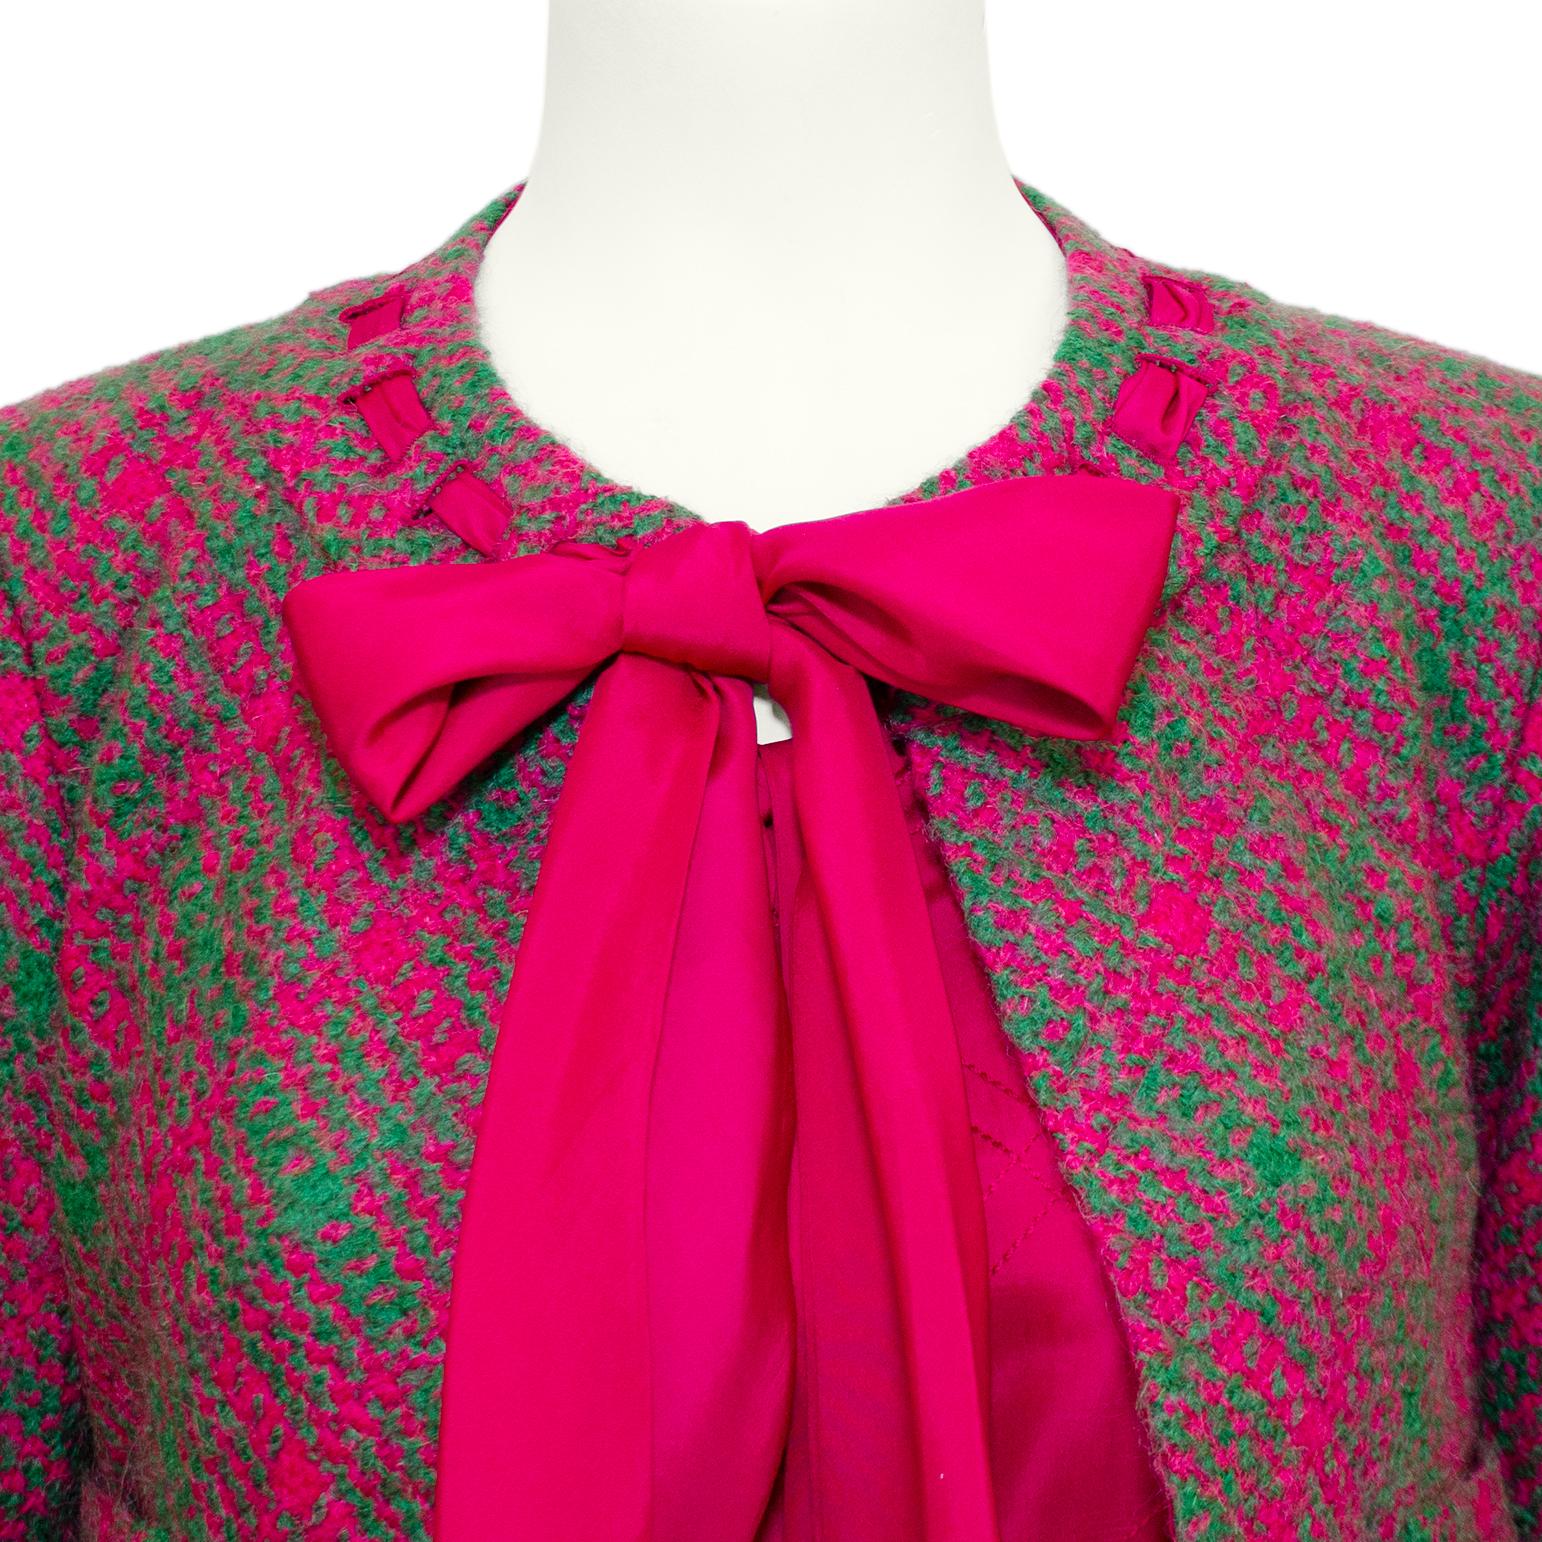 1960s Chanel Haute Couture Magenta and Green Dress and Jacket Ensemble For Sale 1